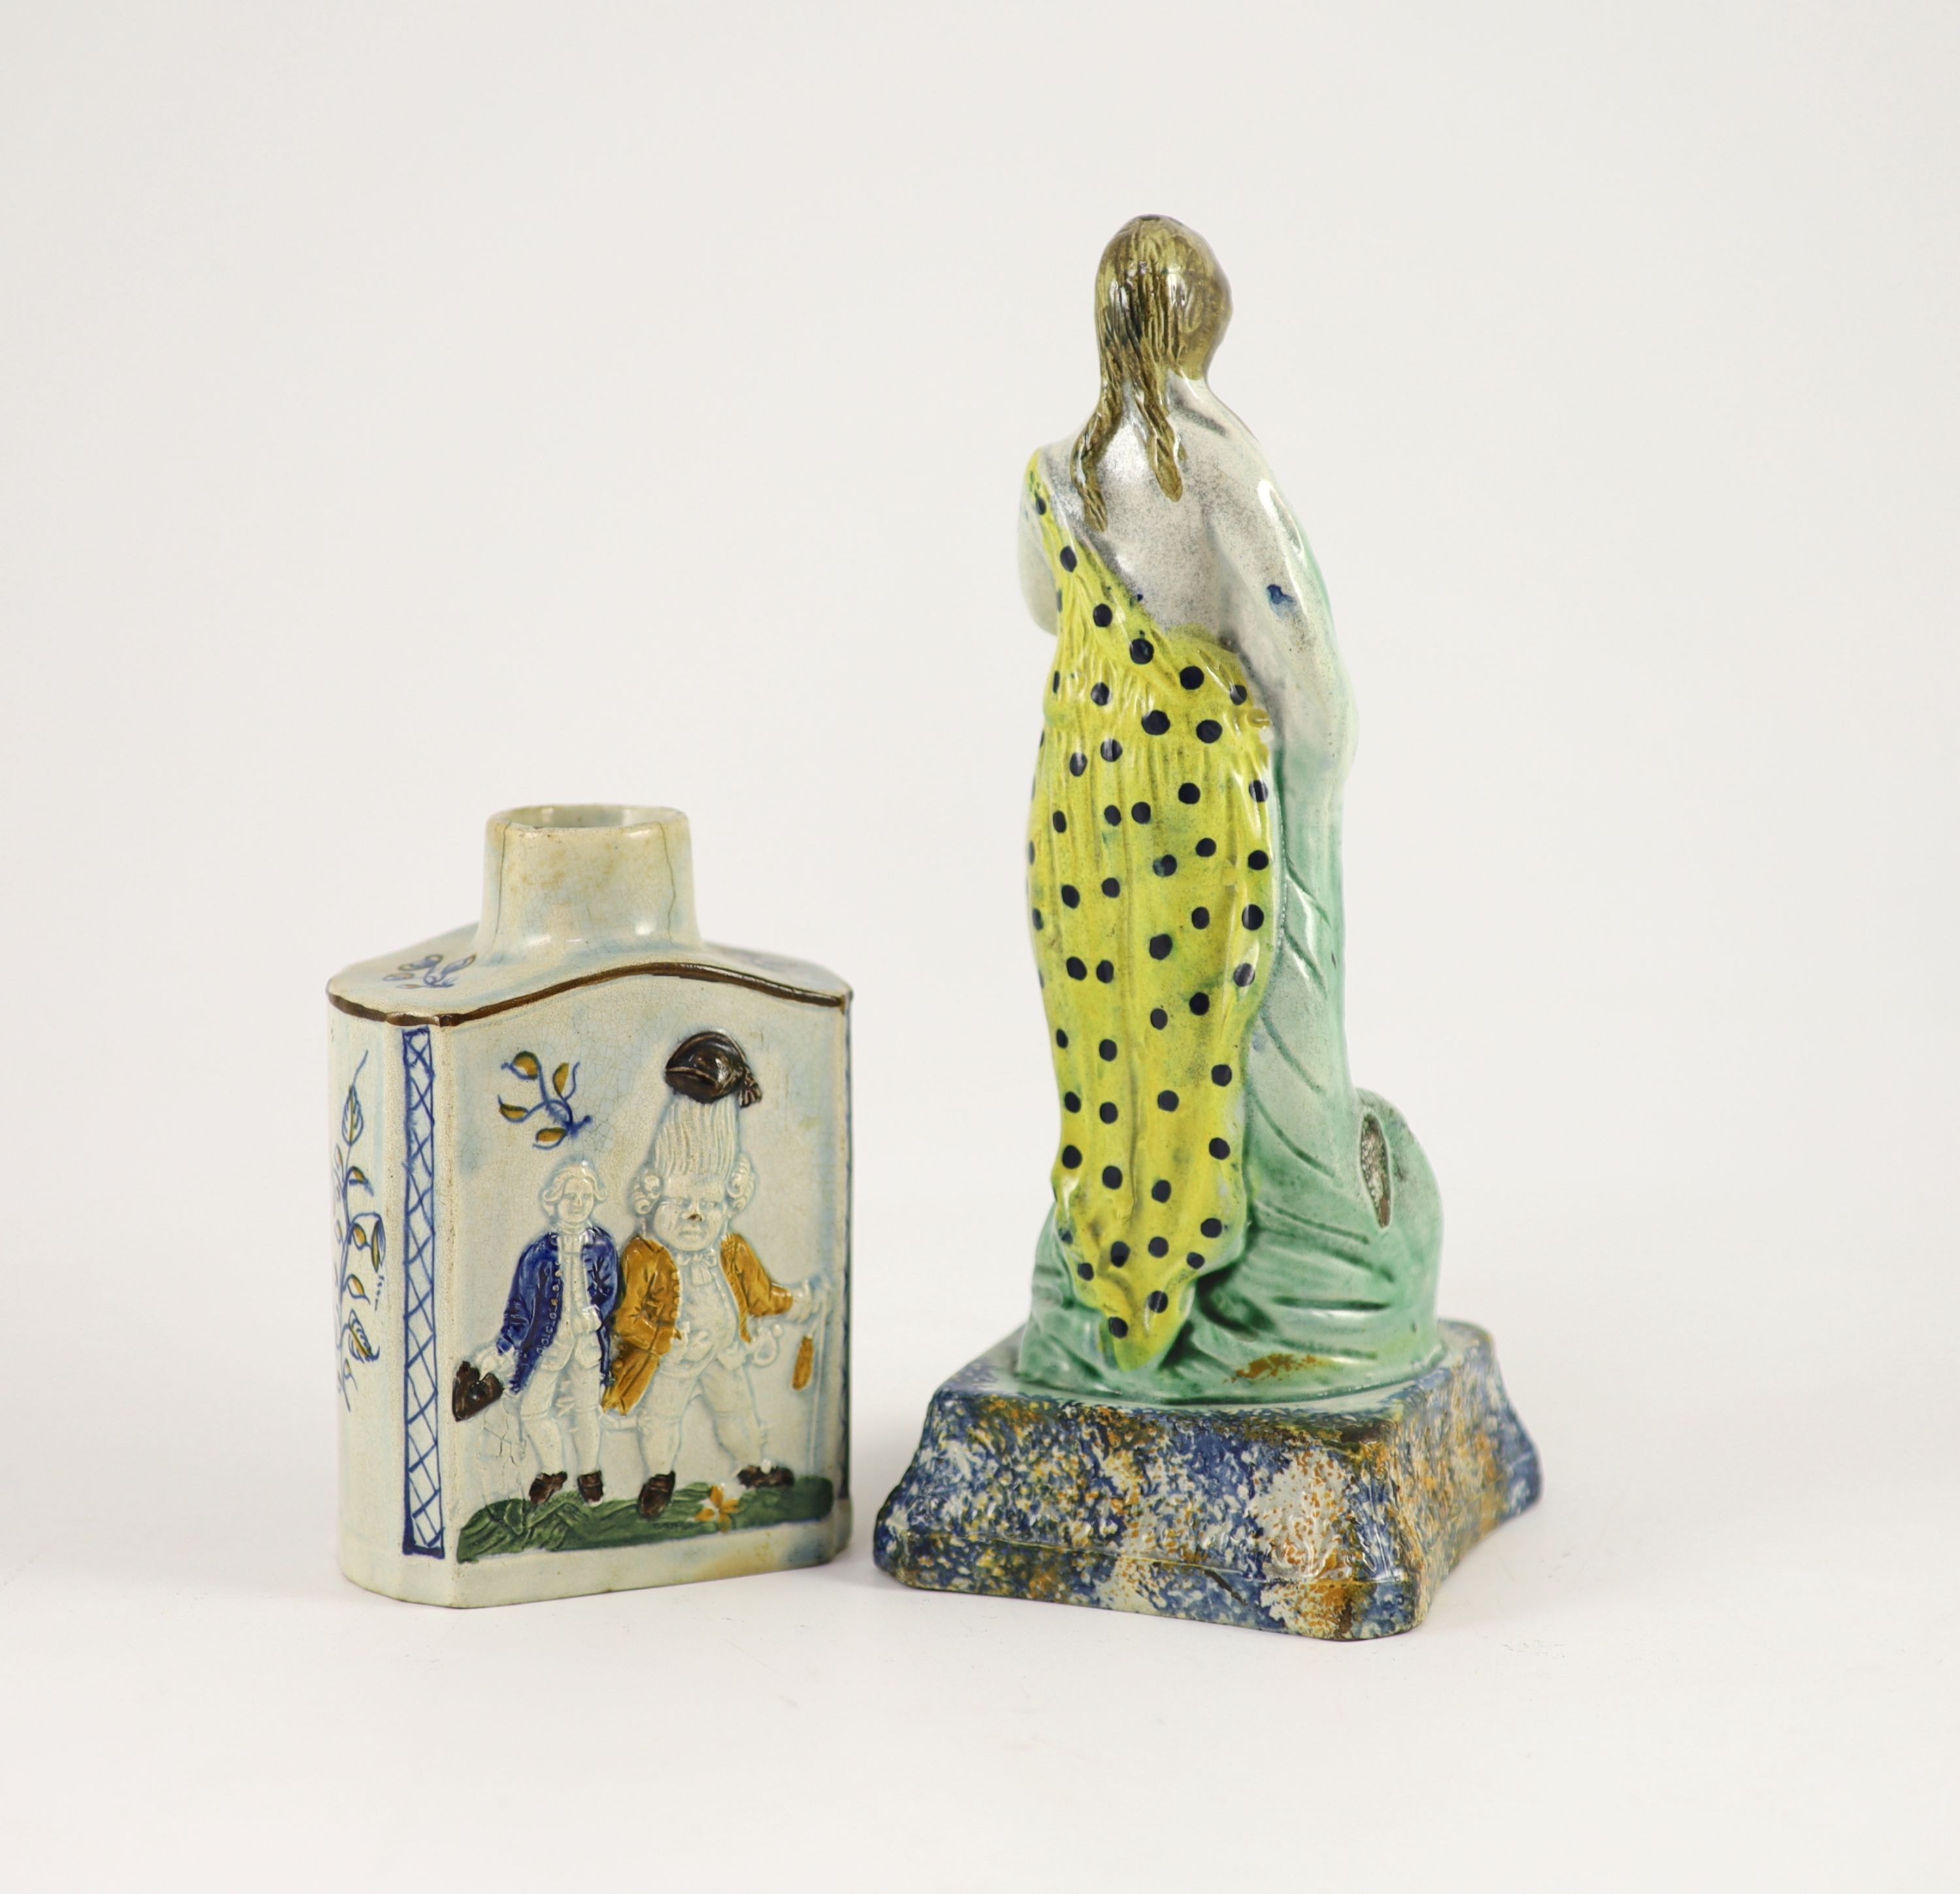 A Staffordshire Prattware pearlware tea caddy and figure of Flora, c.1790, 12.5 and 22cm high